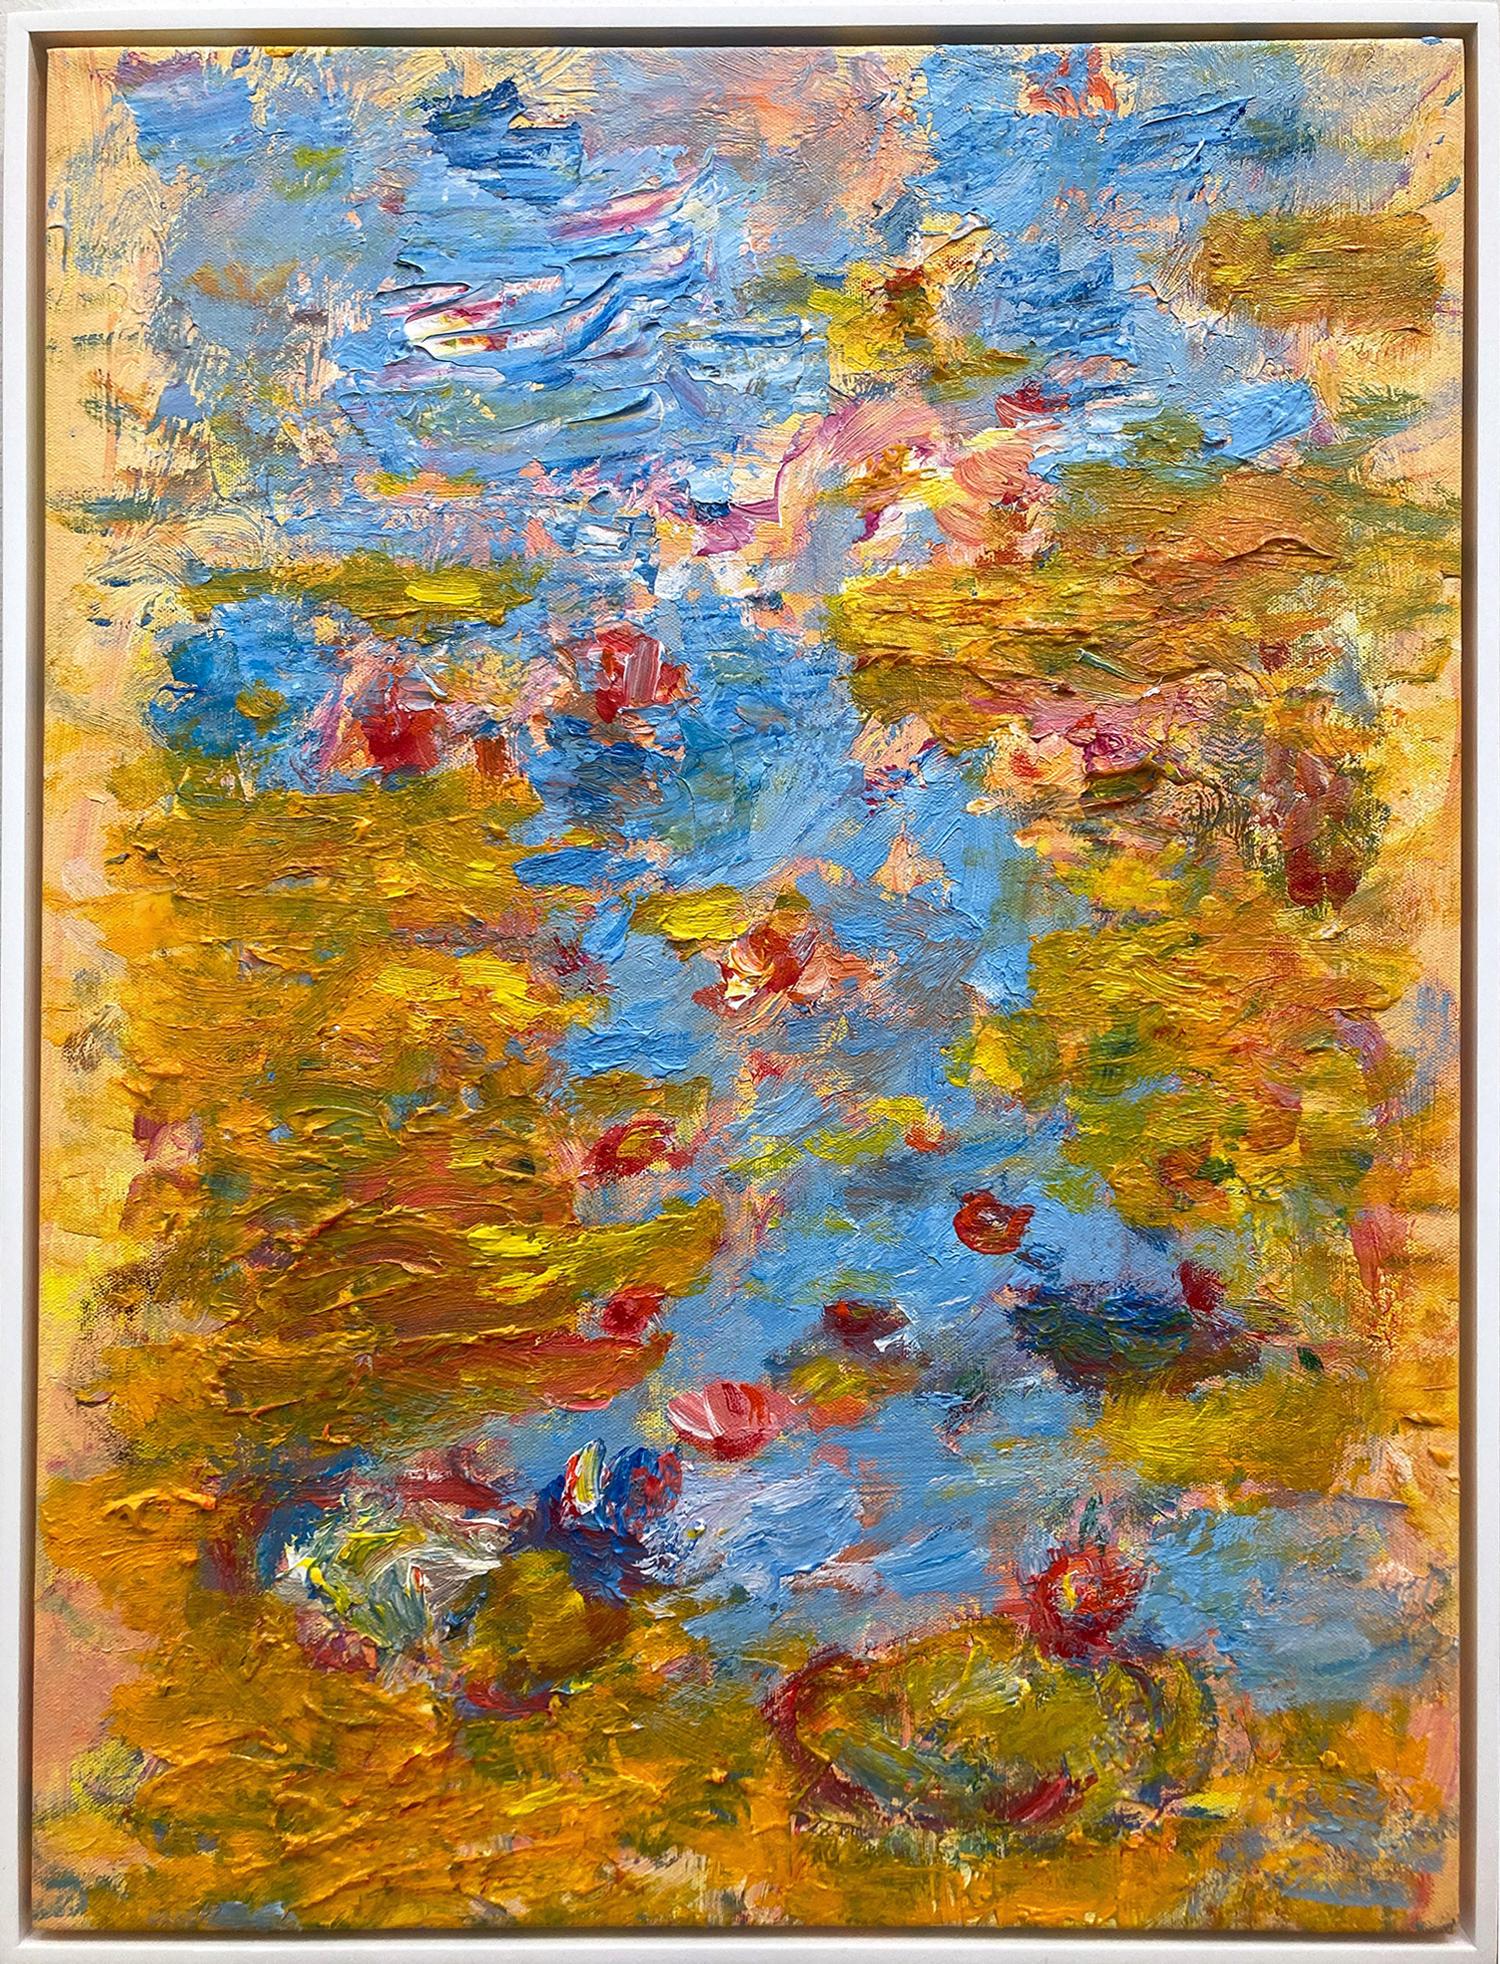 Robert Gregory Phillips Abstract Painting - "The Pond in Golden Light" Contemporary Painting in the style of Claude Monet